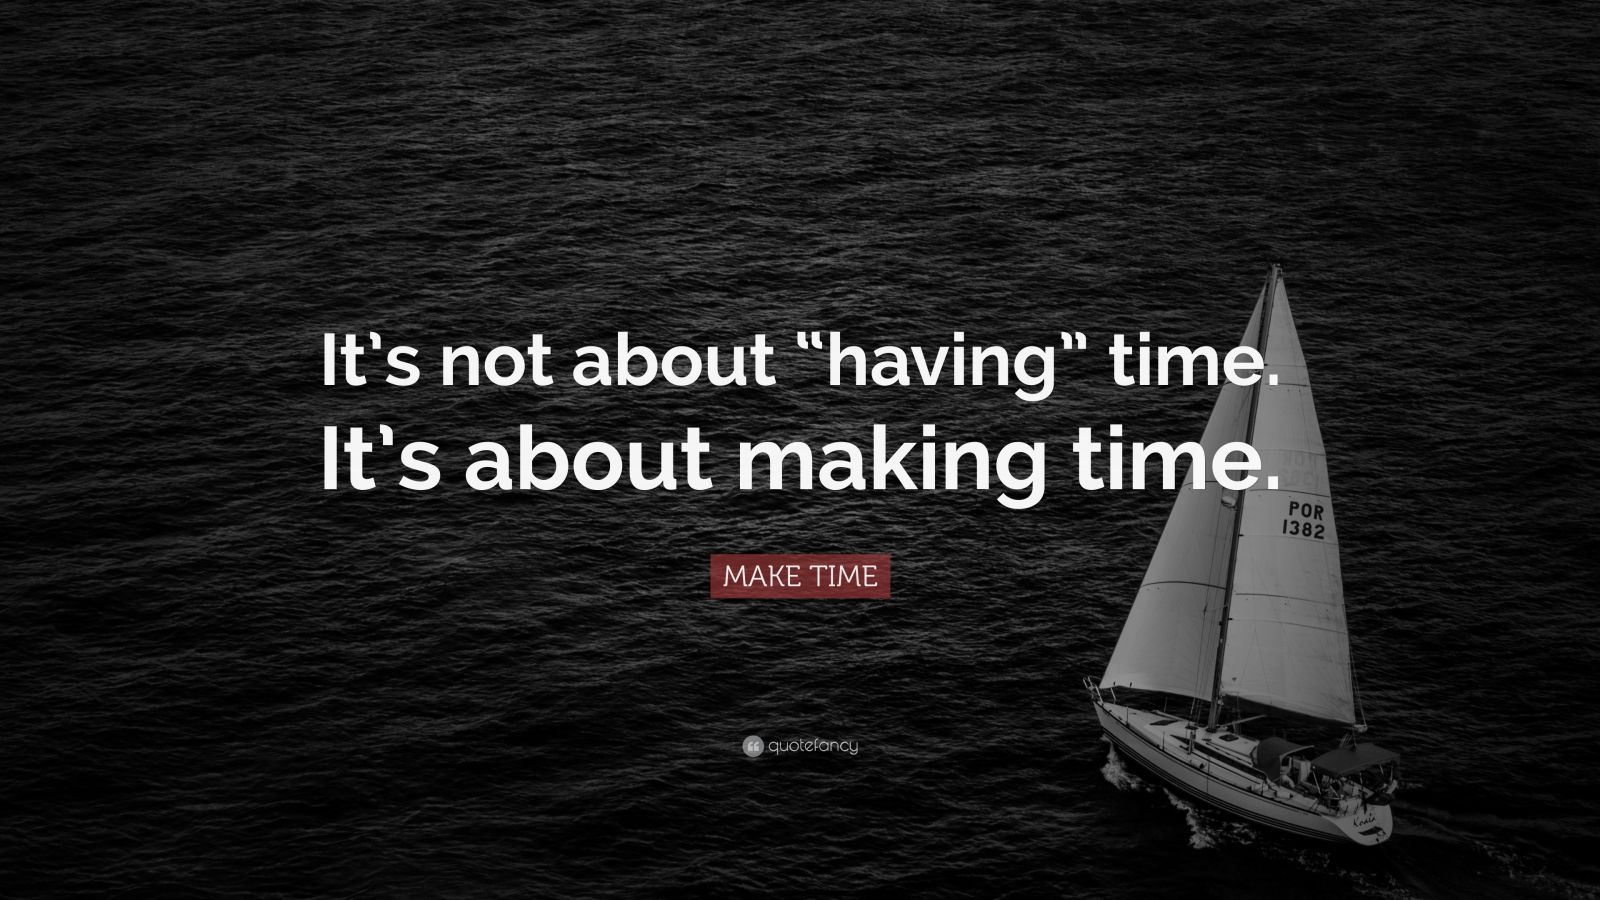 MAKE TIME Quote: “It’s not about “having” time. It’s about making time